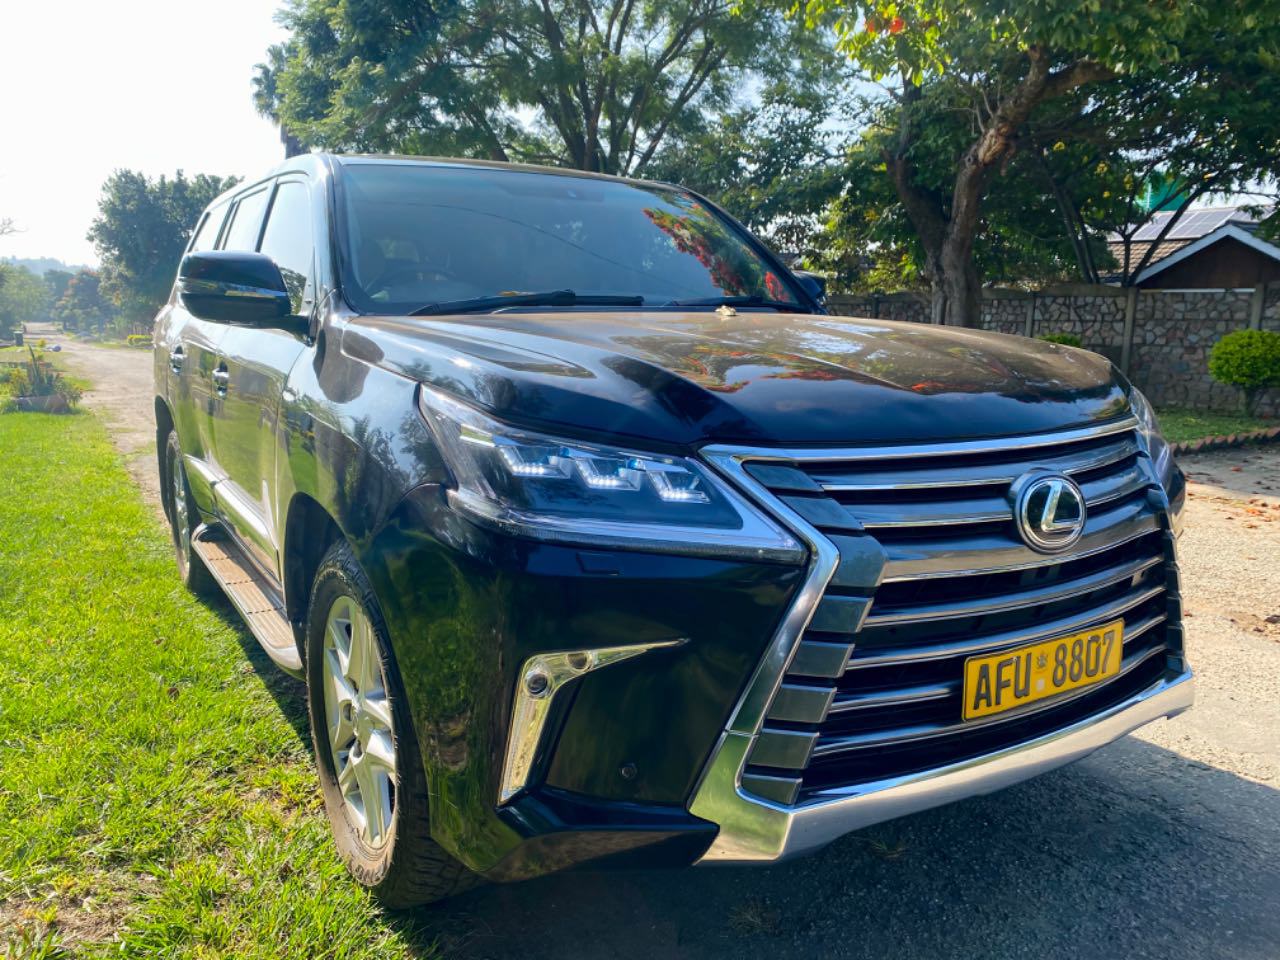 A picture of Lexus LX 570 2013 model